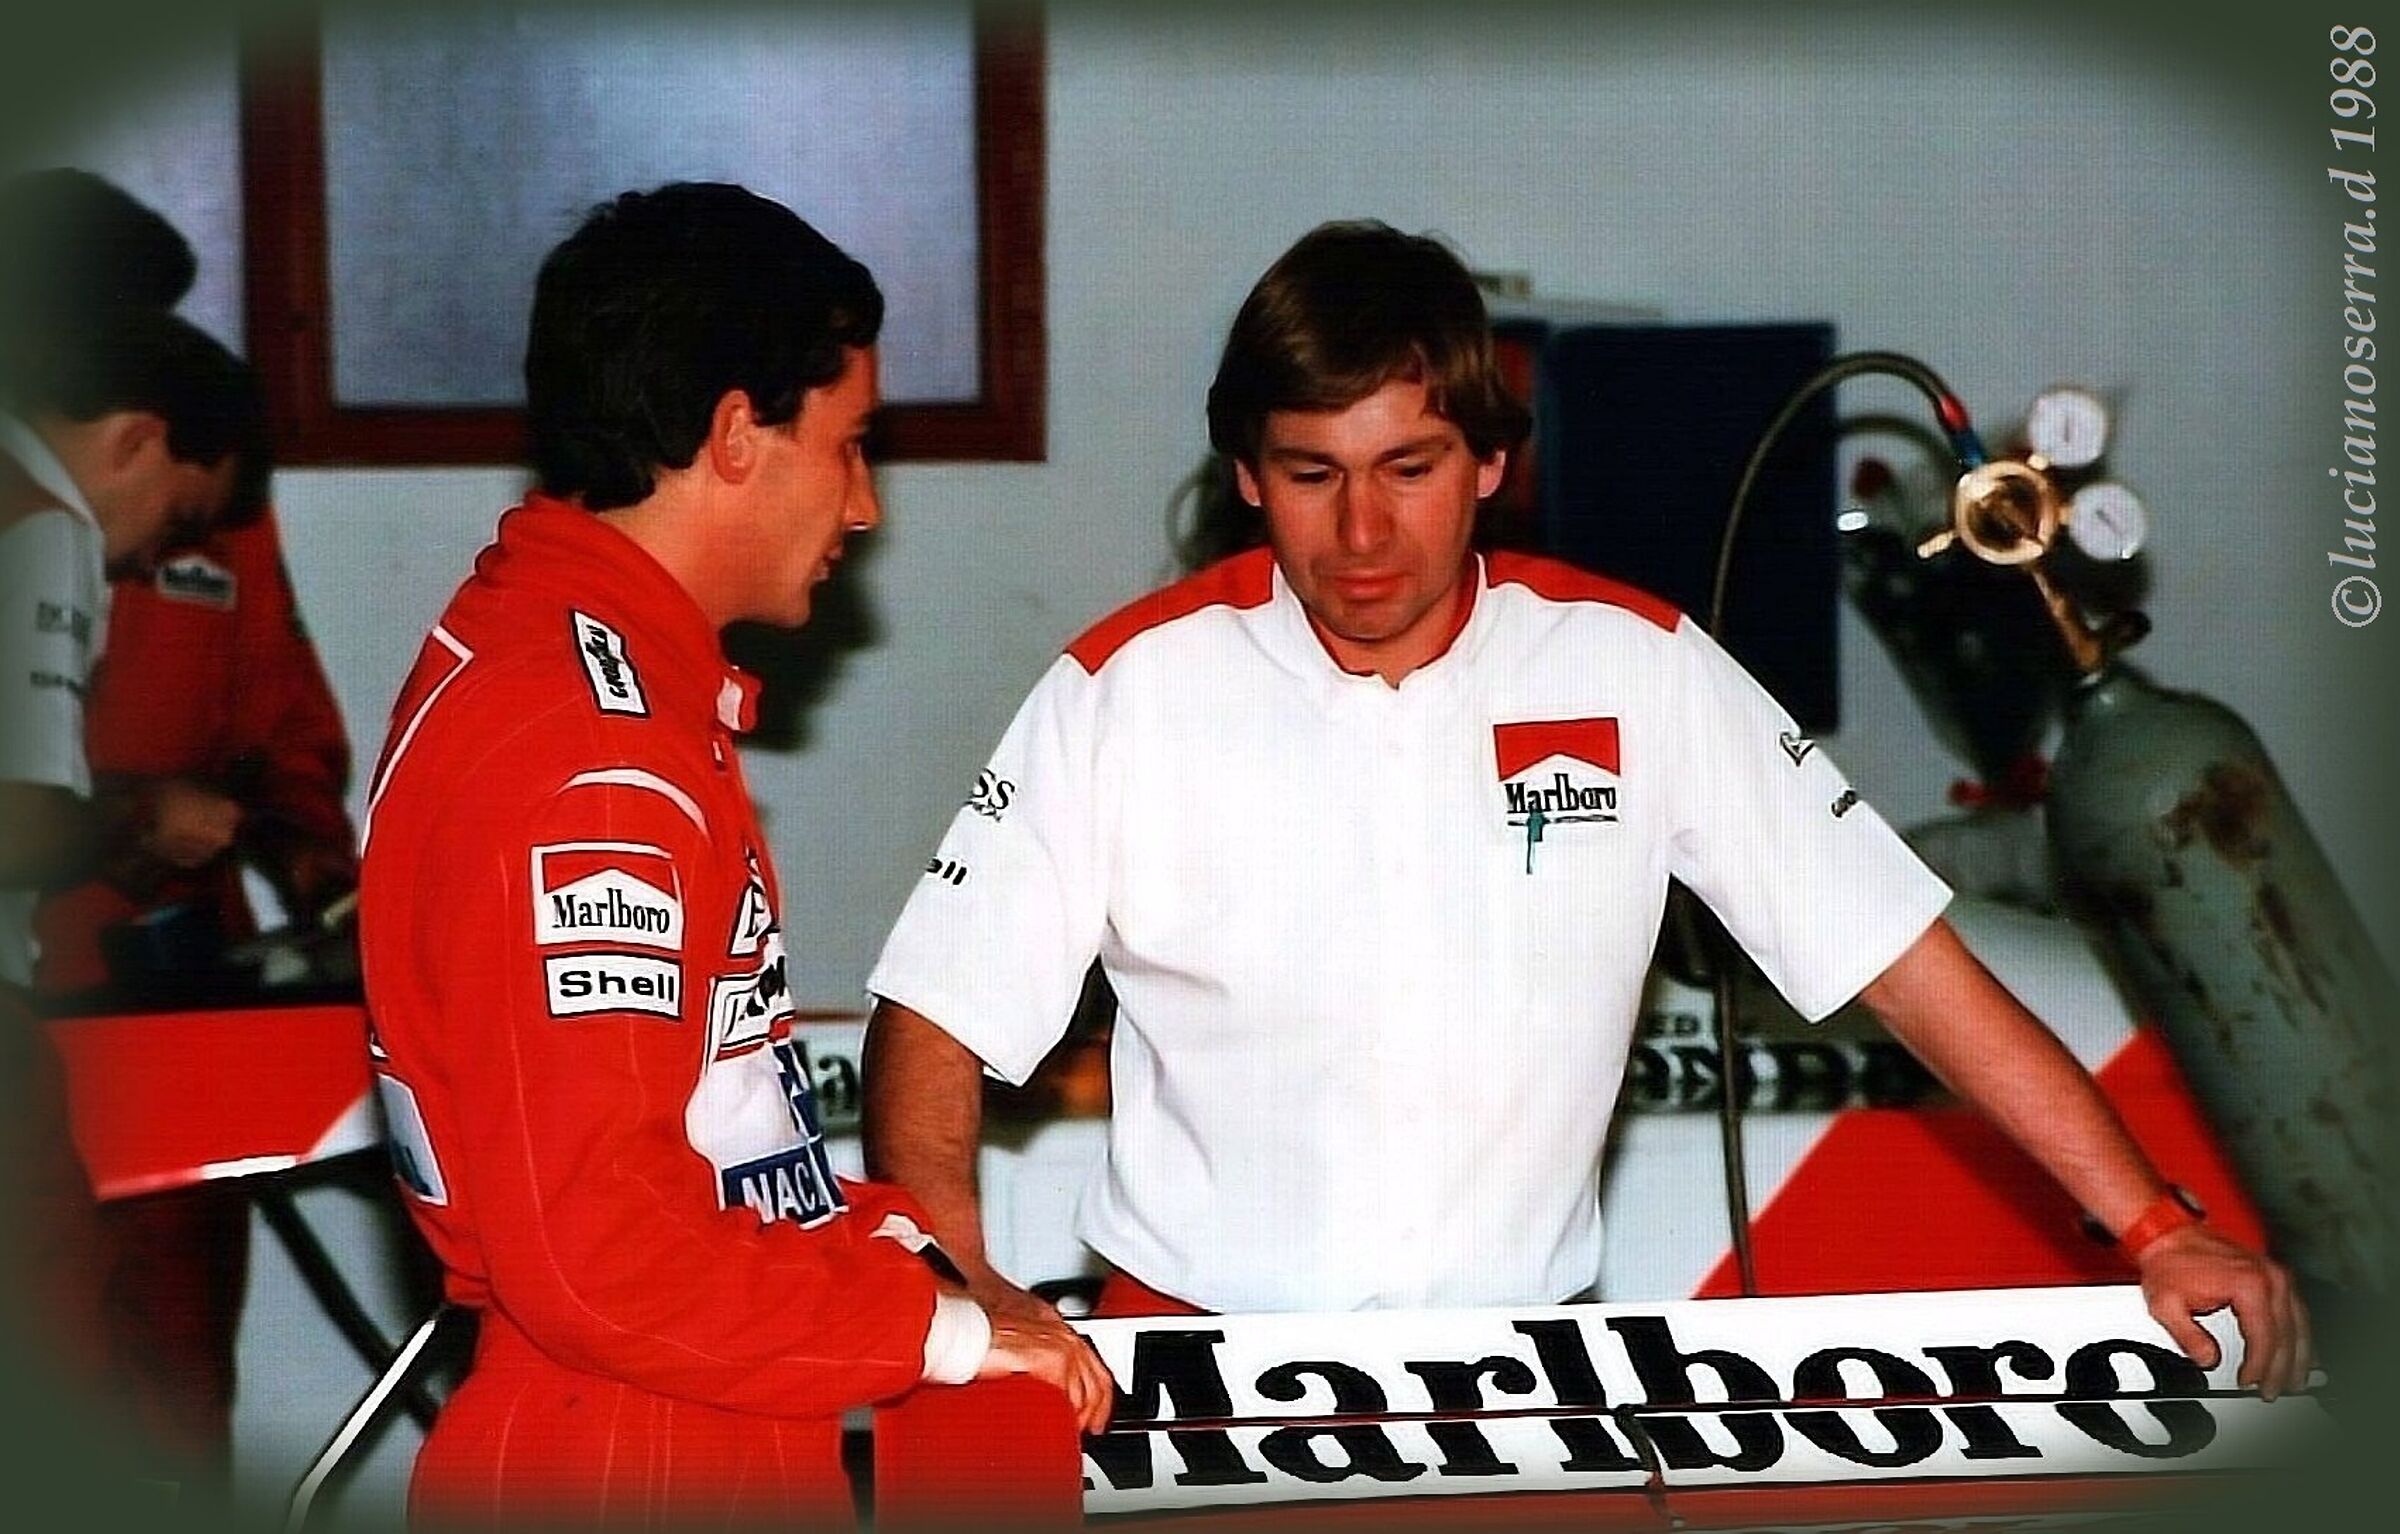 Ayrton Senna in the box before the start of the trials 1988...